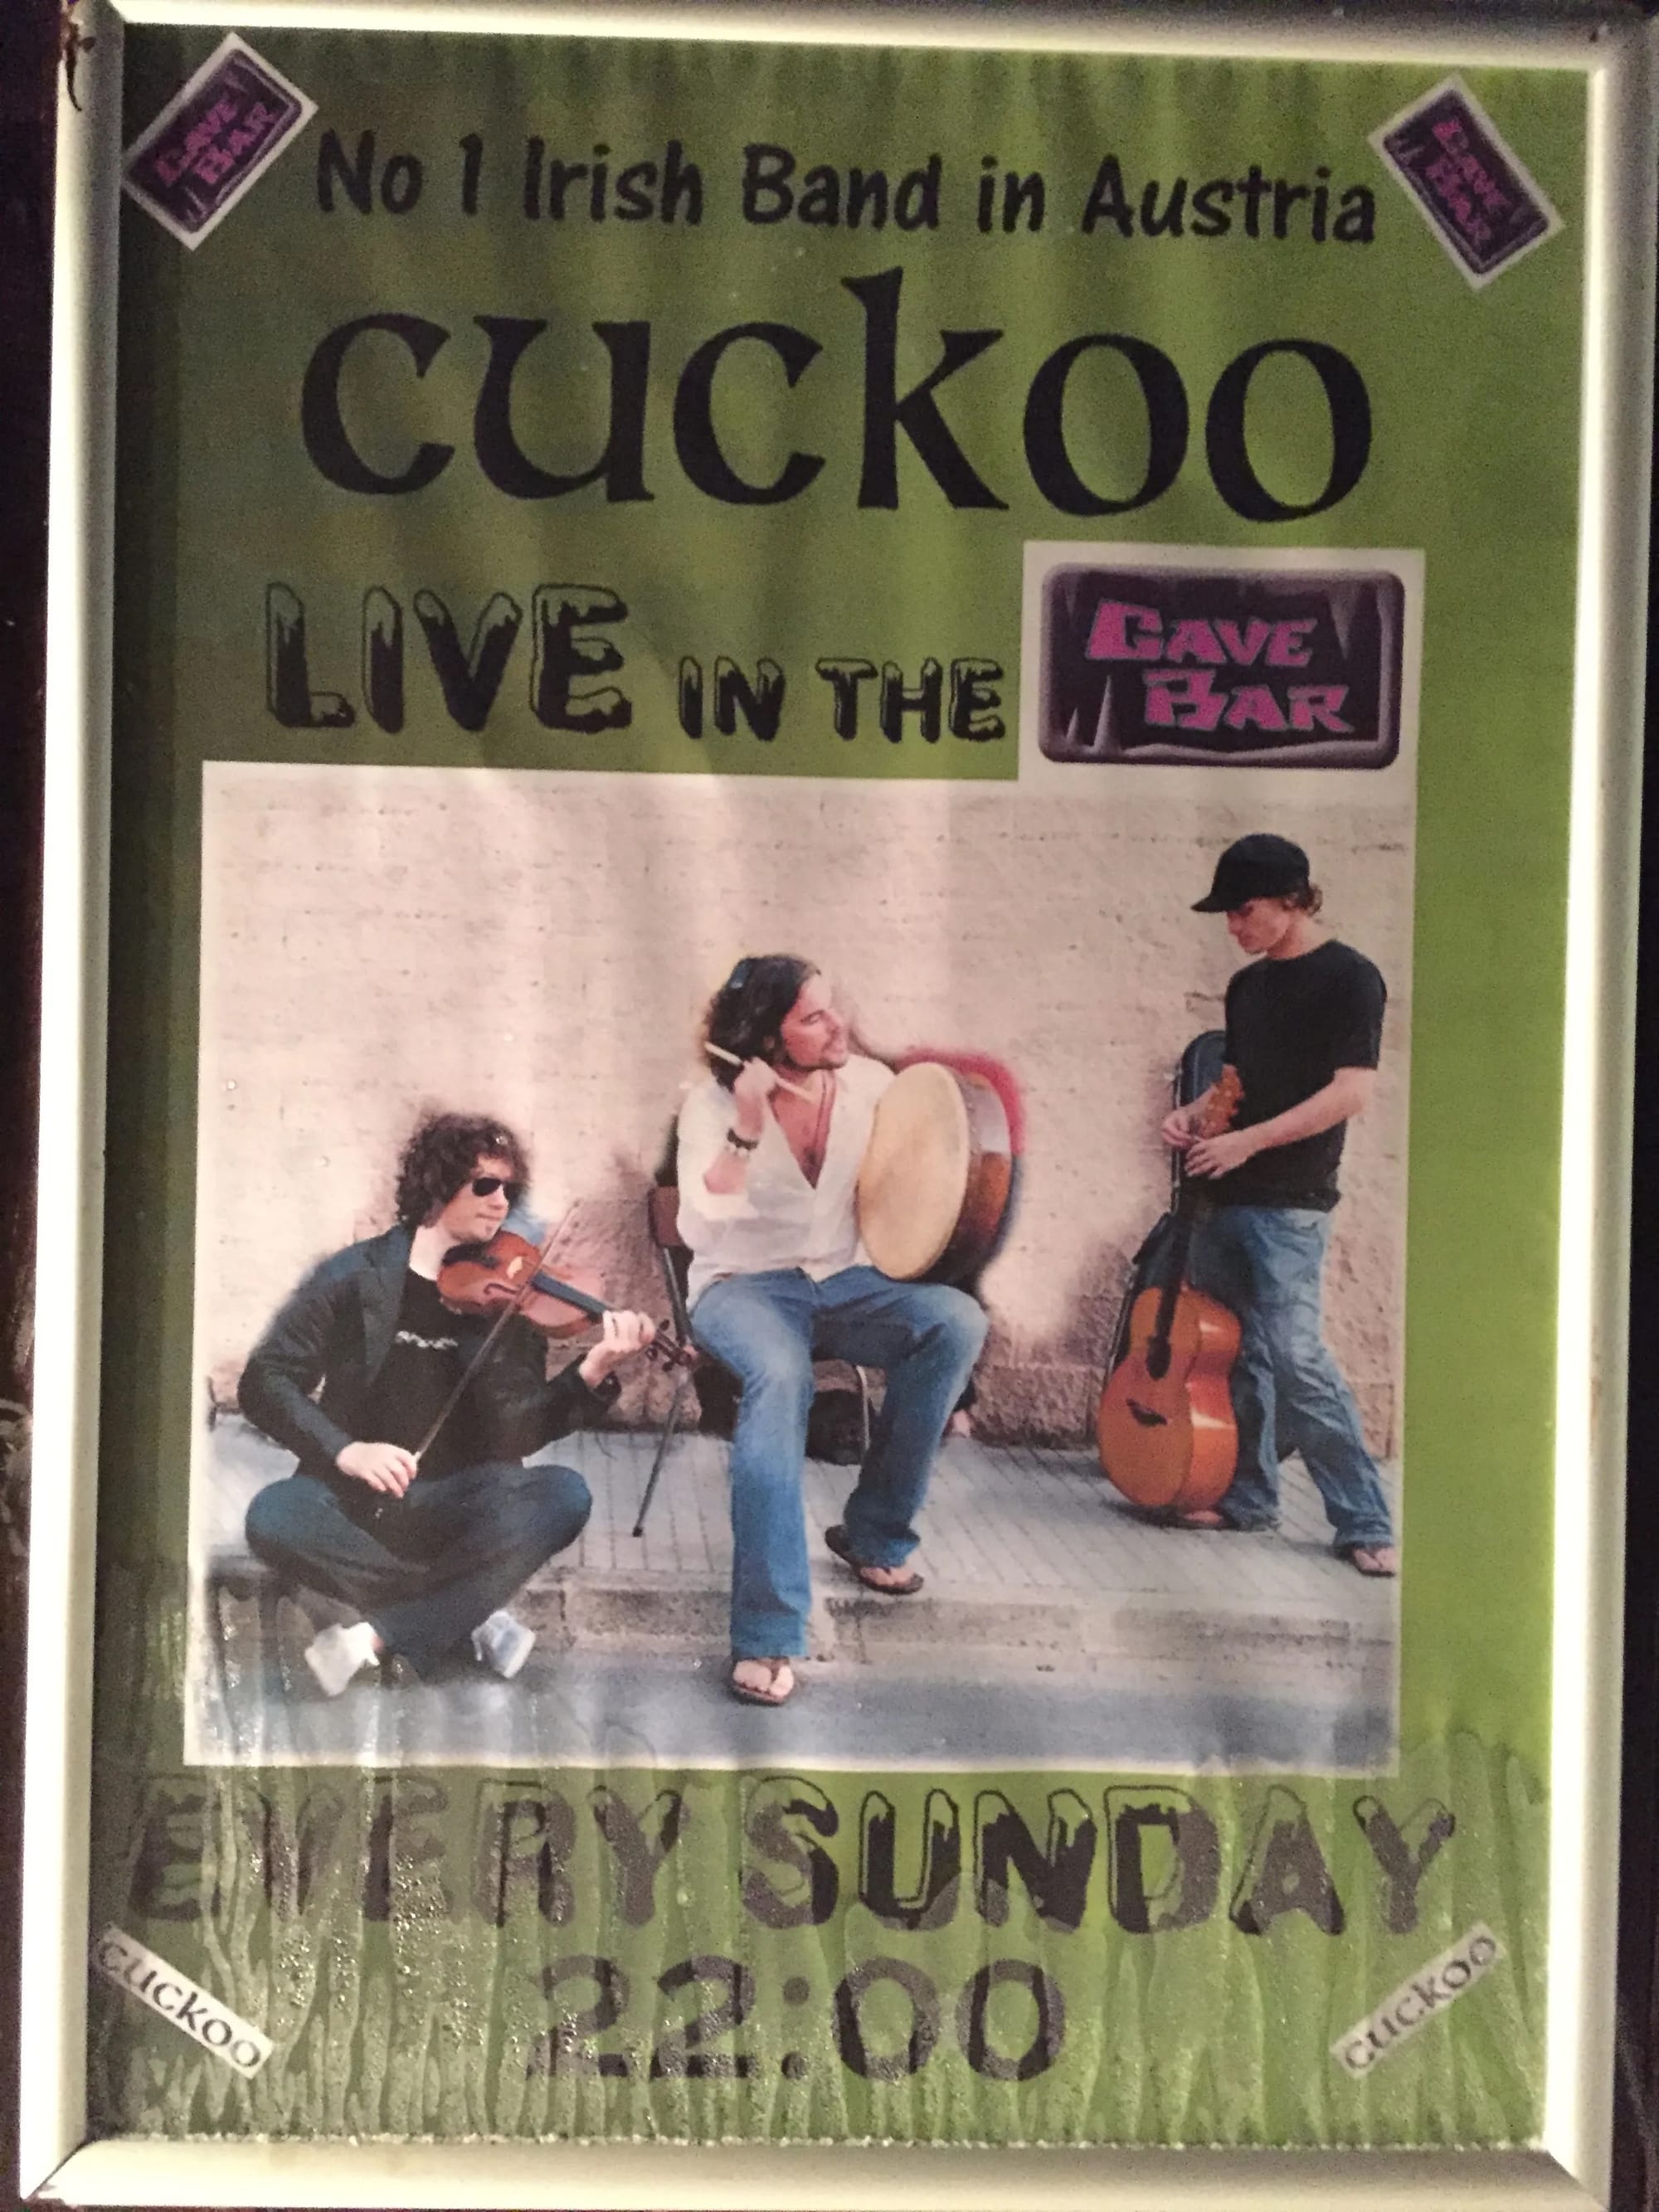 Photo by Author — The Cave Bar — Cuckoo — the best Irish band in Austria